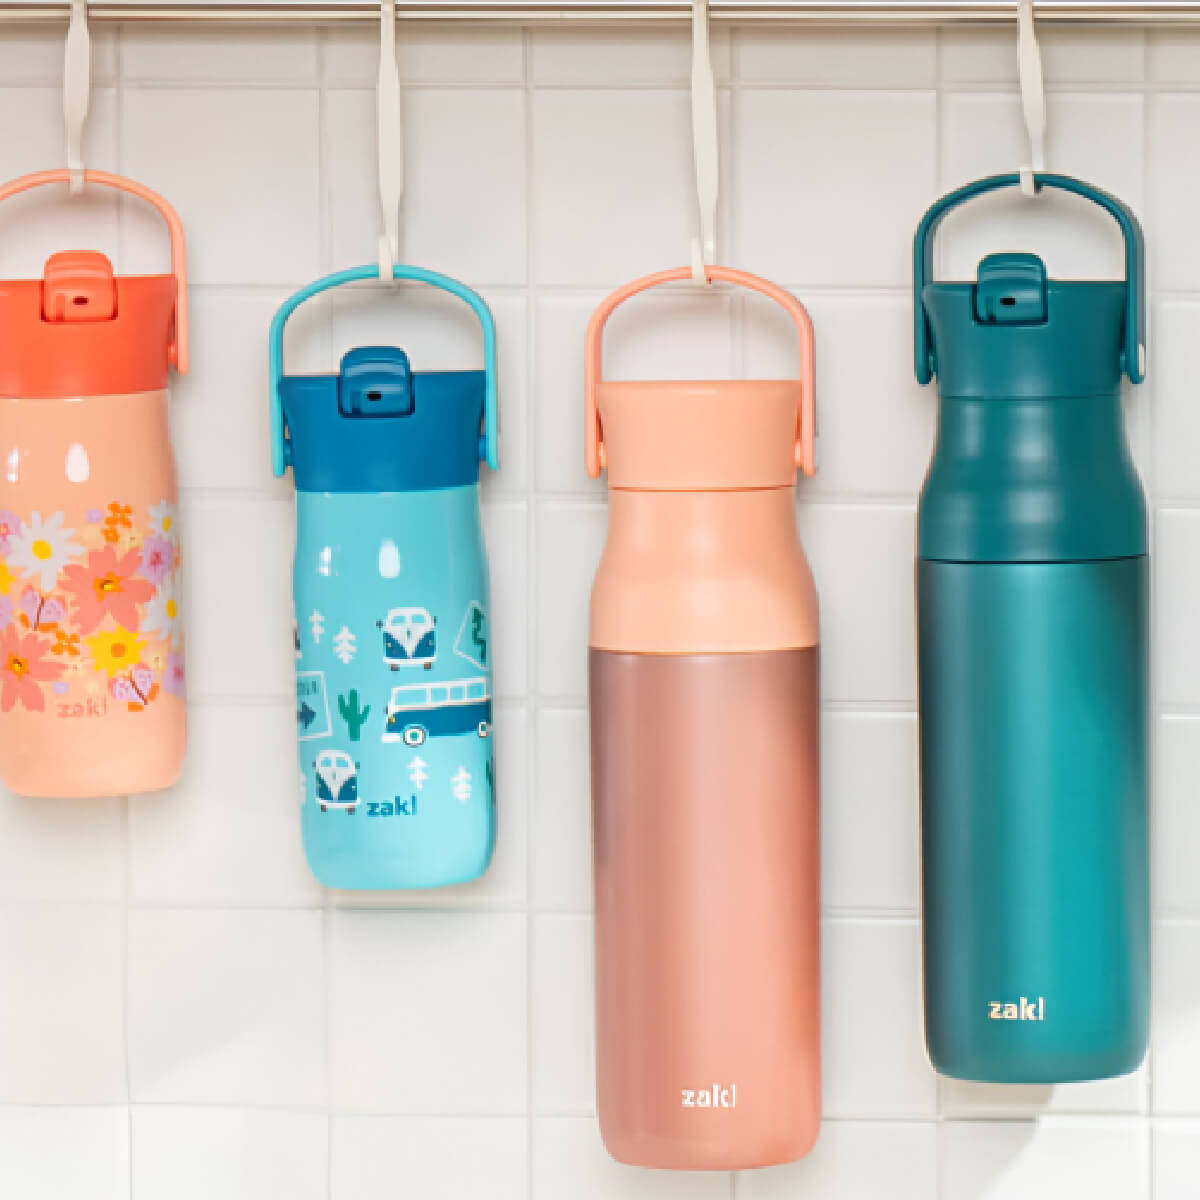 Zak Harmony Eco-Friendly Water Bottles - Great for on the go